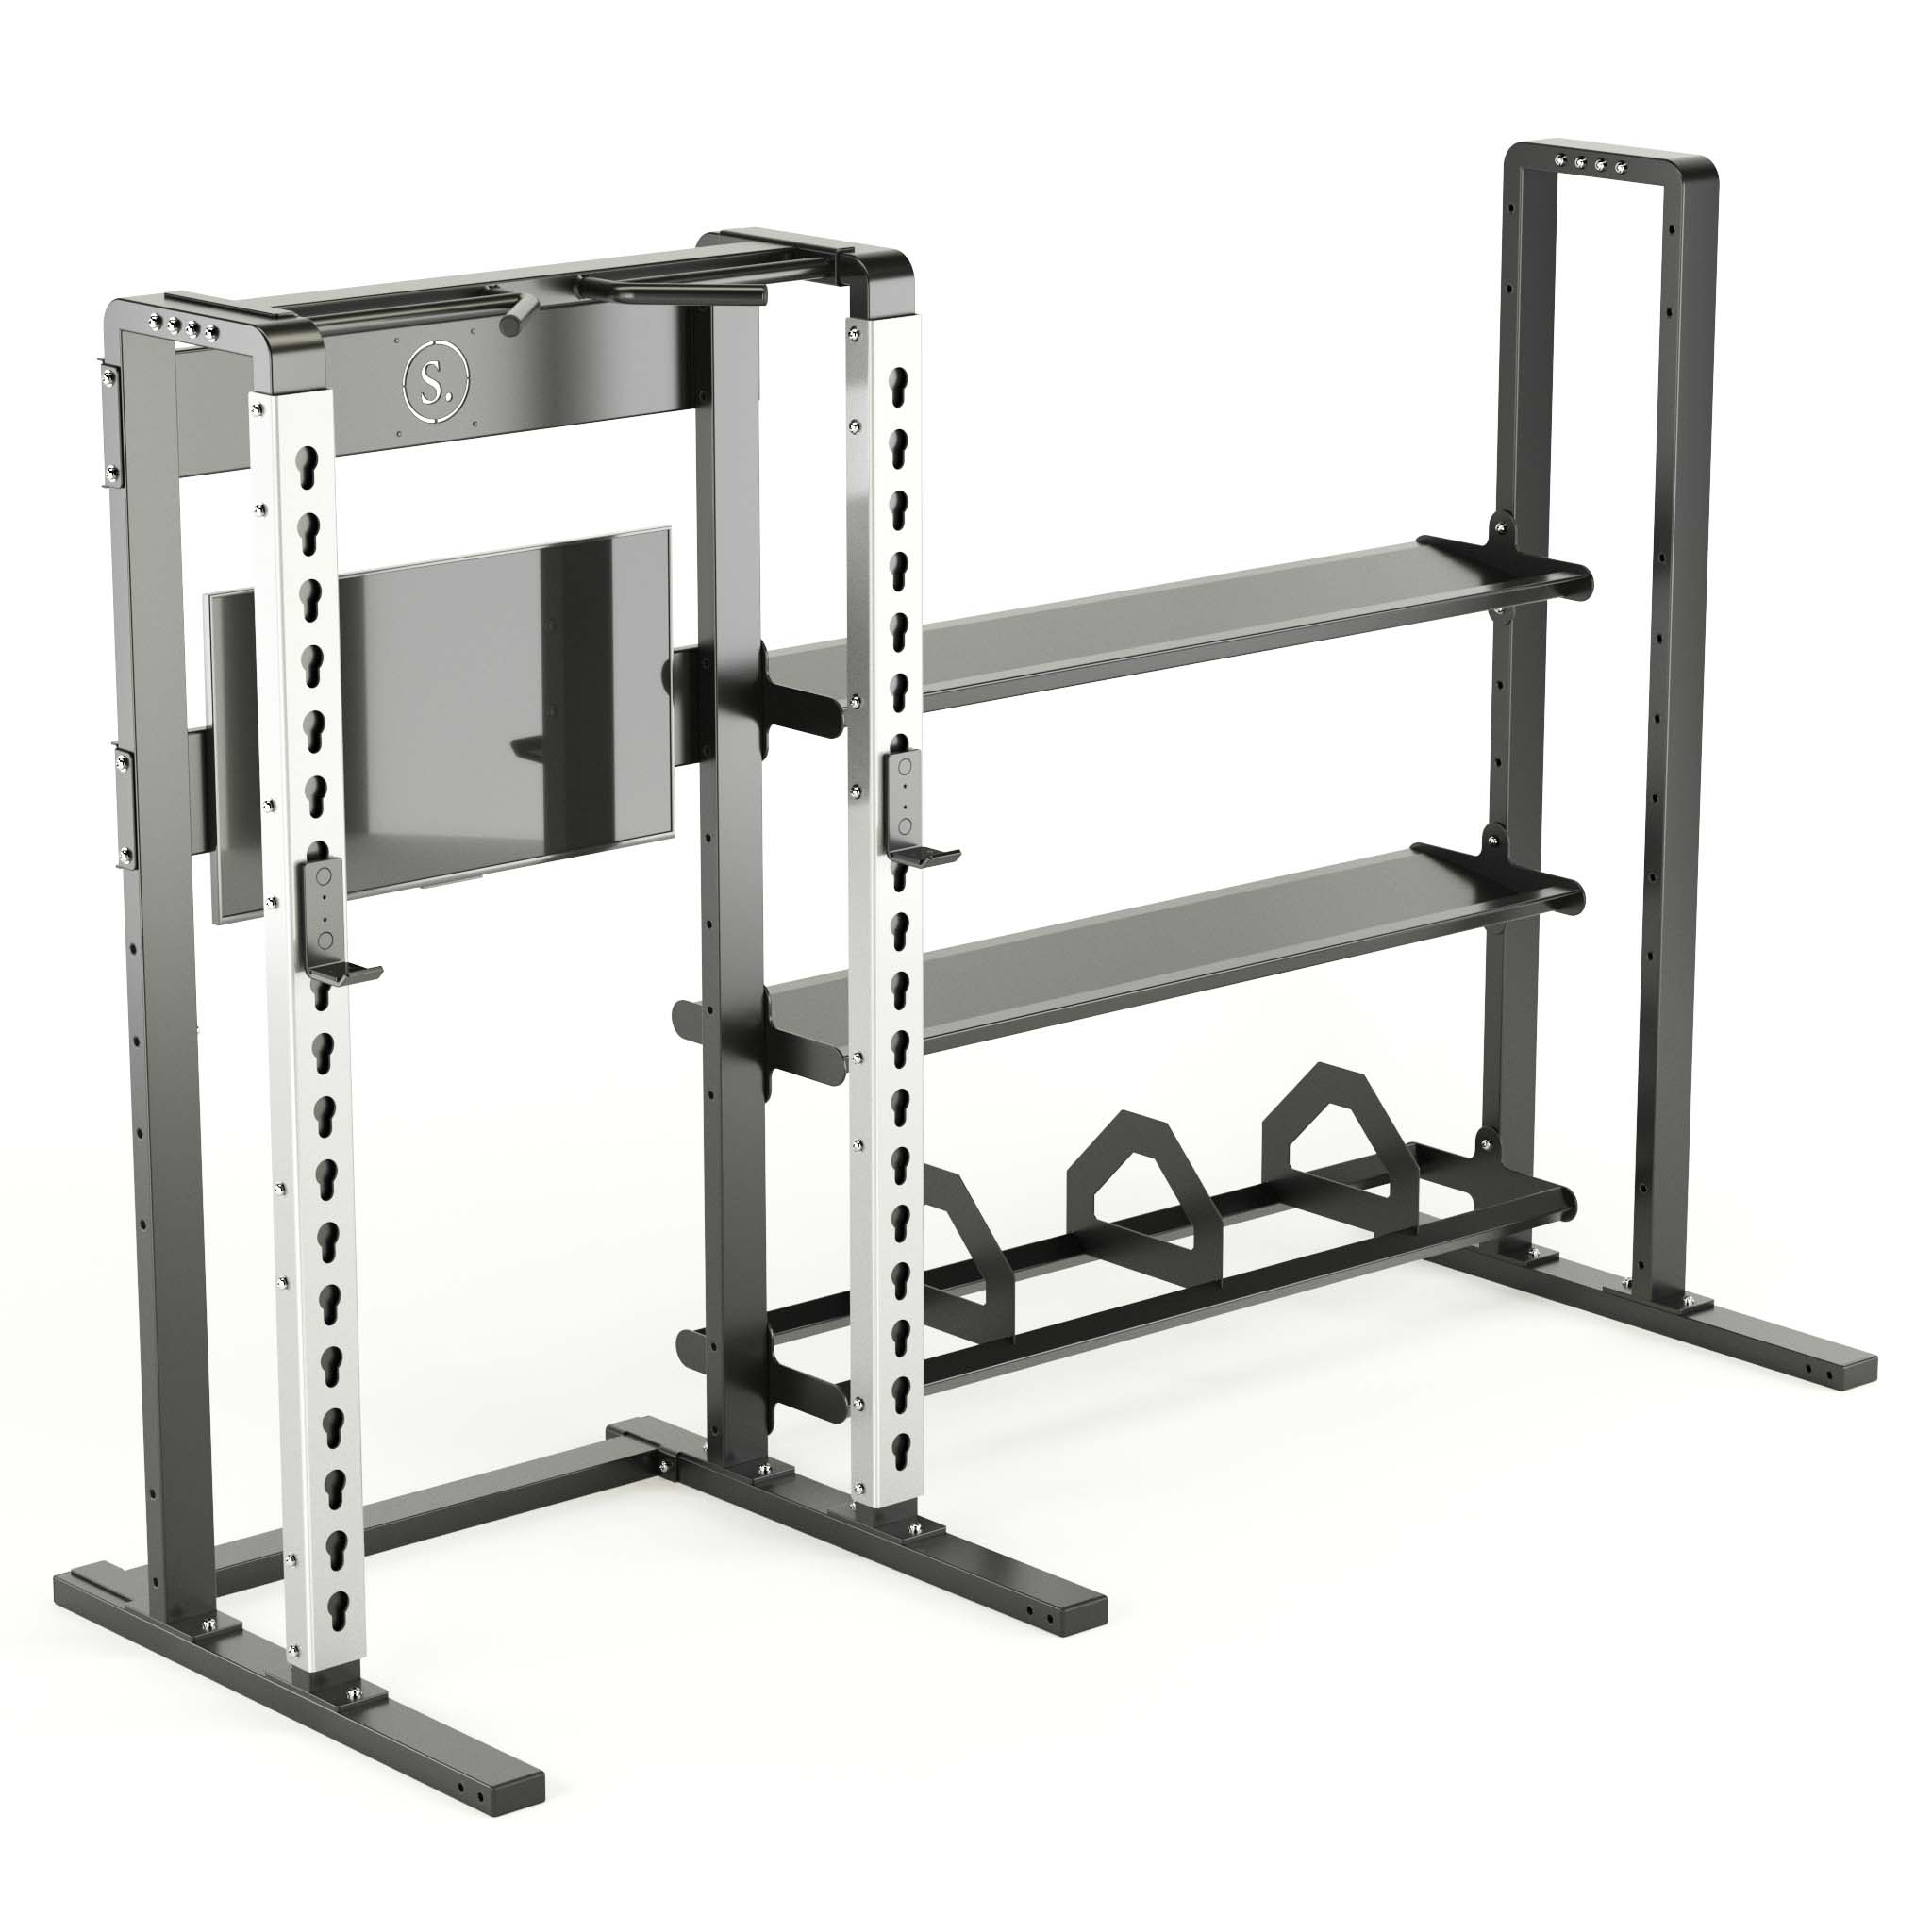 Solo Half Rack Plus with wide storage in silver